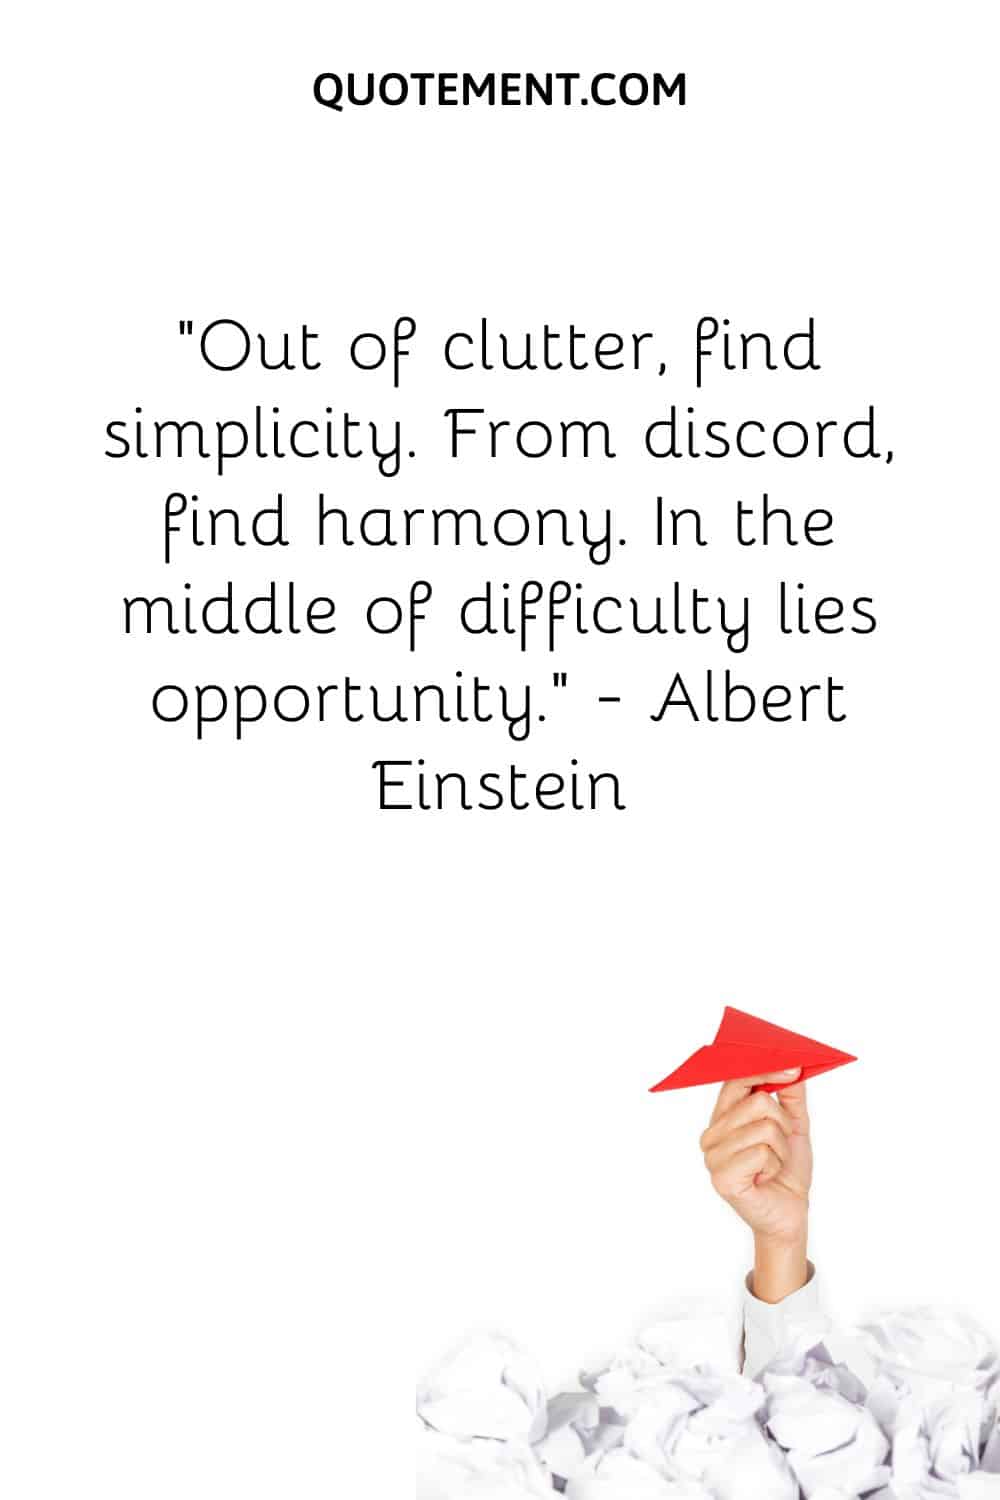 Out of clutter, find simplicity